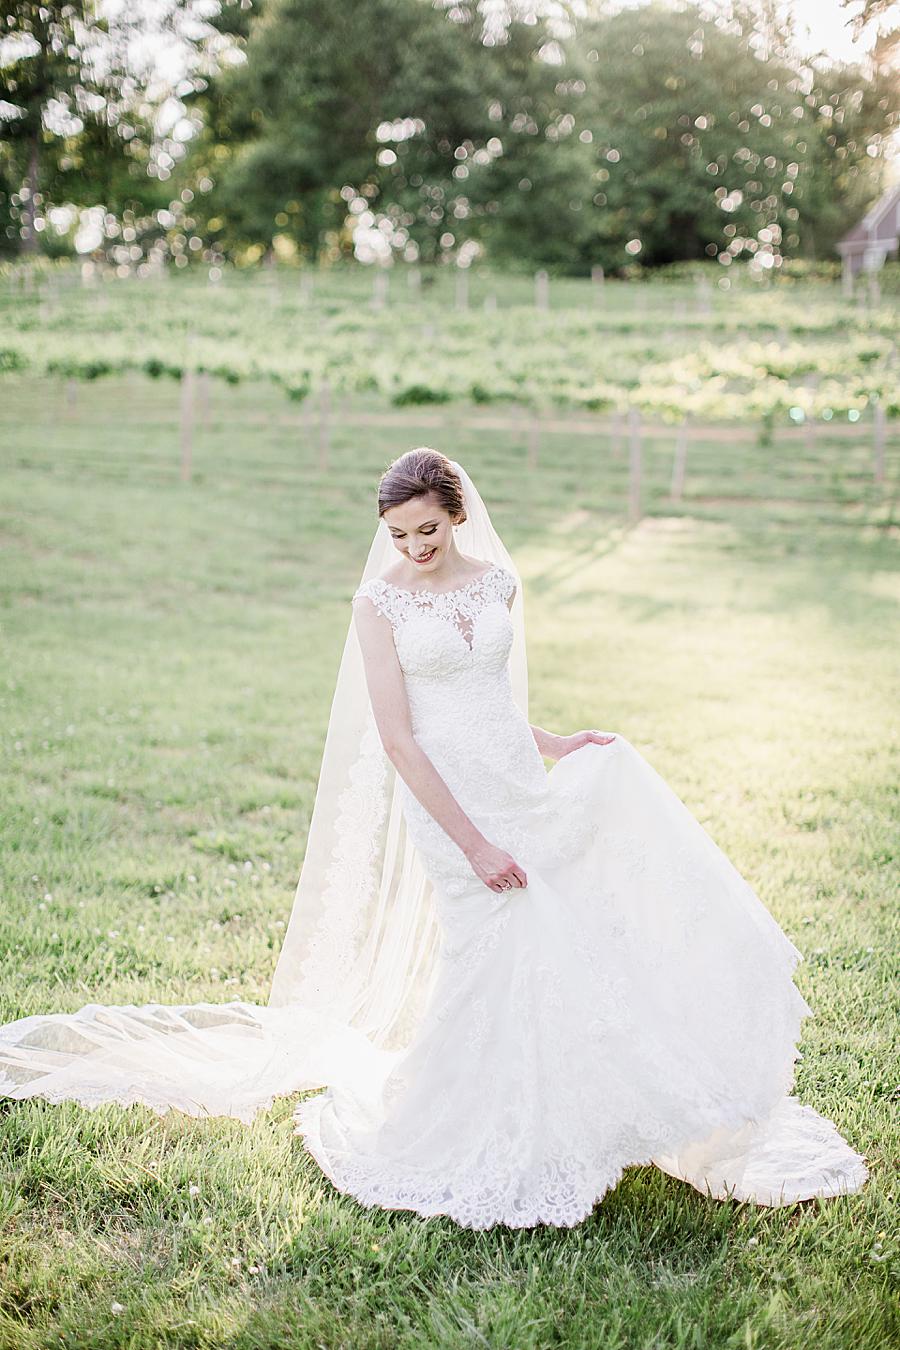 Twirling pose at this Ramble Creek Bridal session by Knoxville Wedding Photographer, Amanda May Photos.